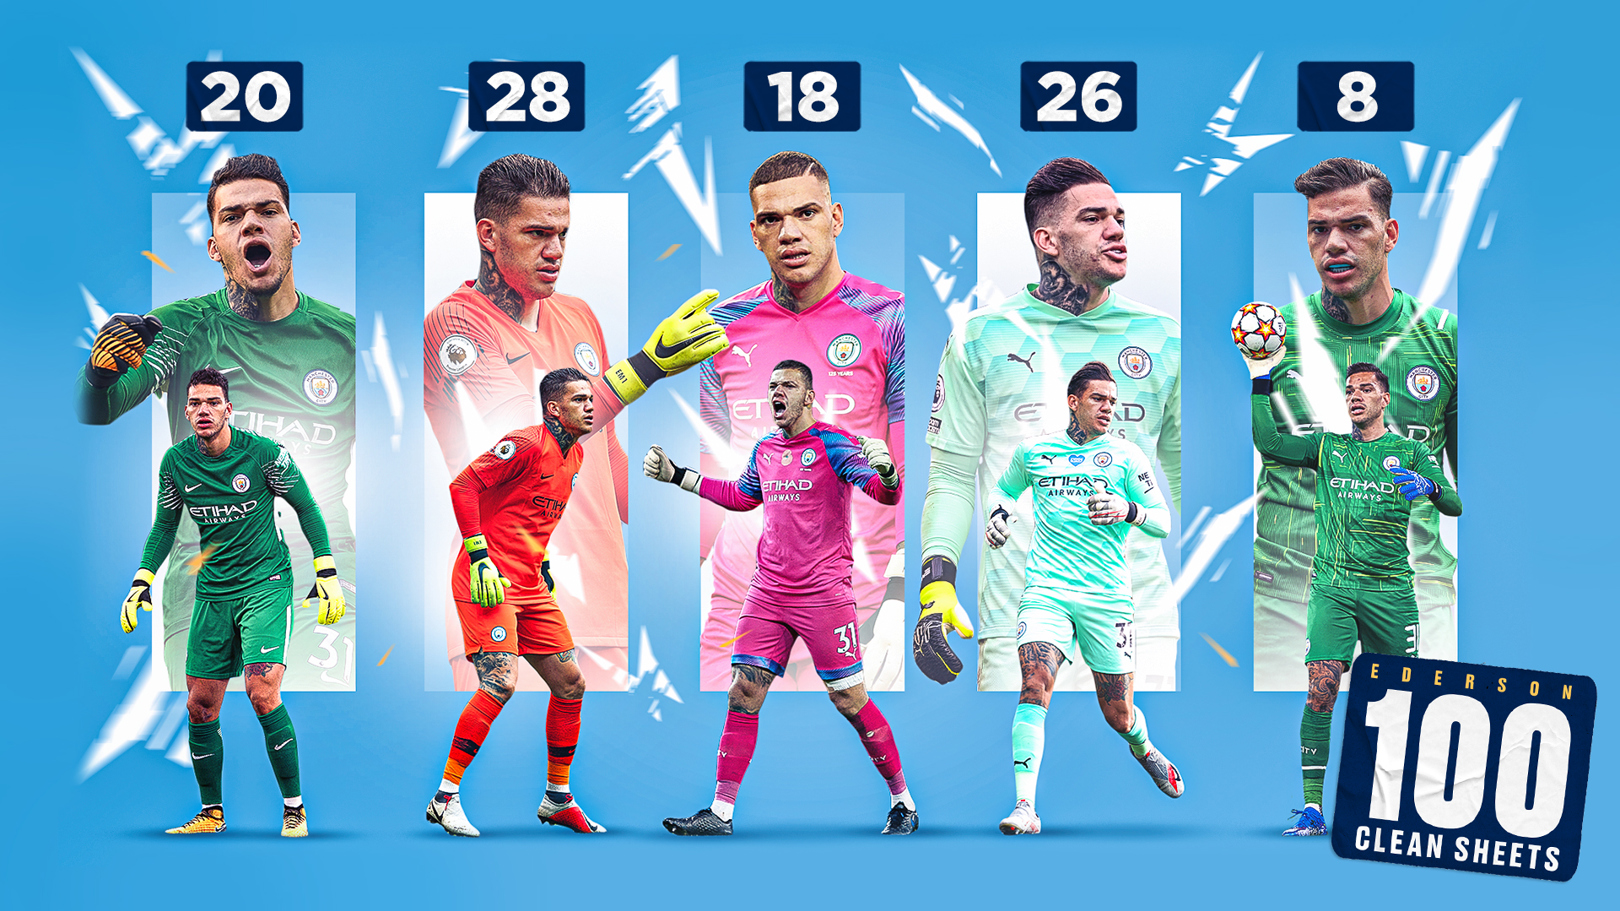 Amazing stats behind Ederson’s century of clean sheets 